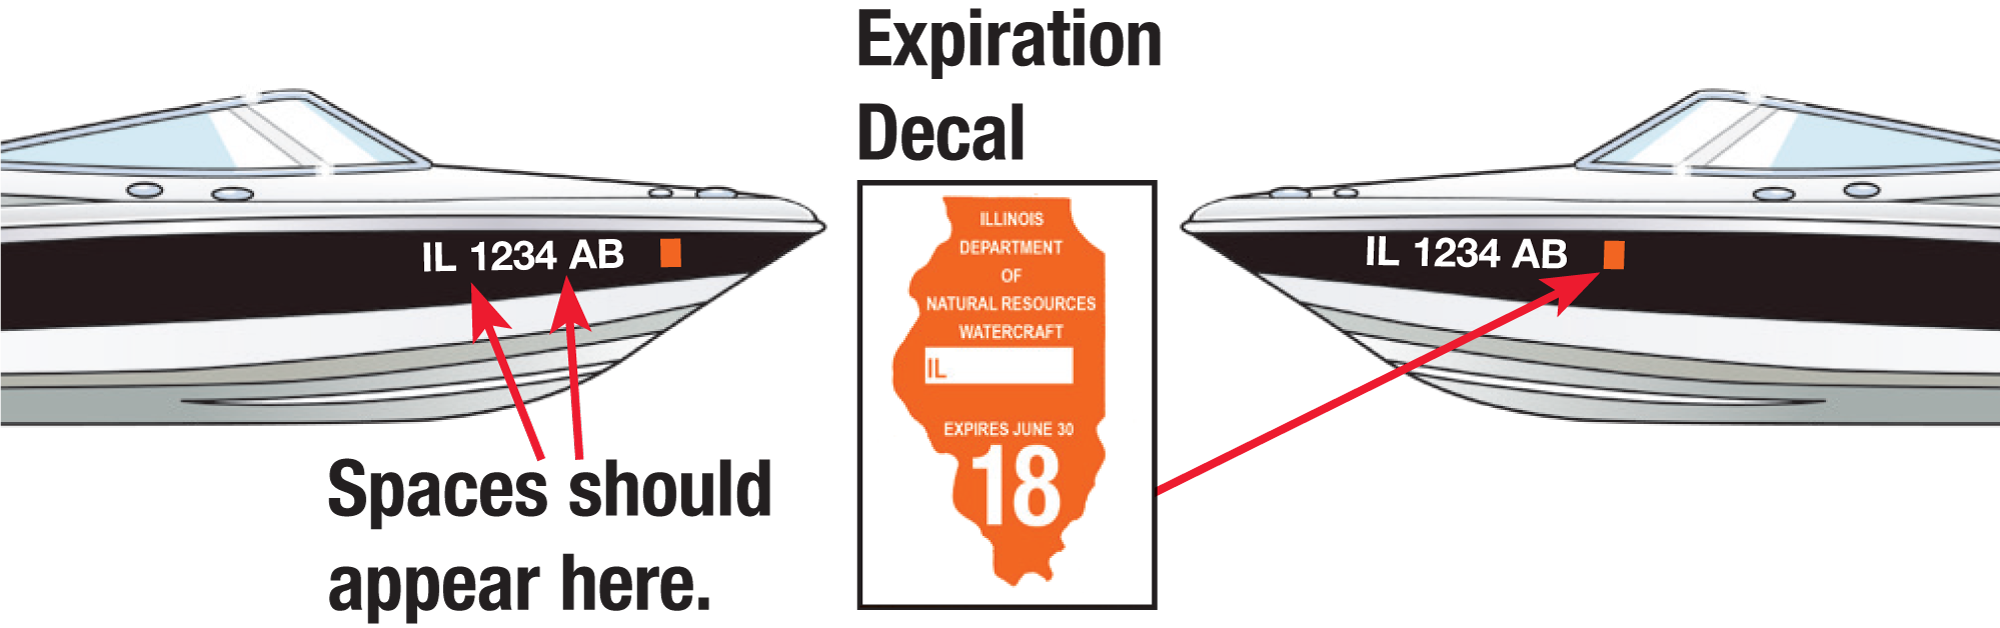 Illinois DNR Boat Number Regulations Decal